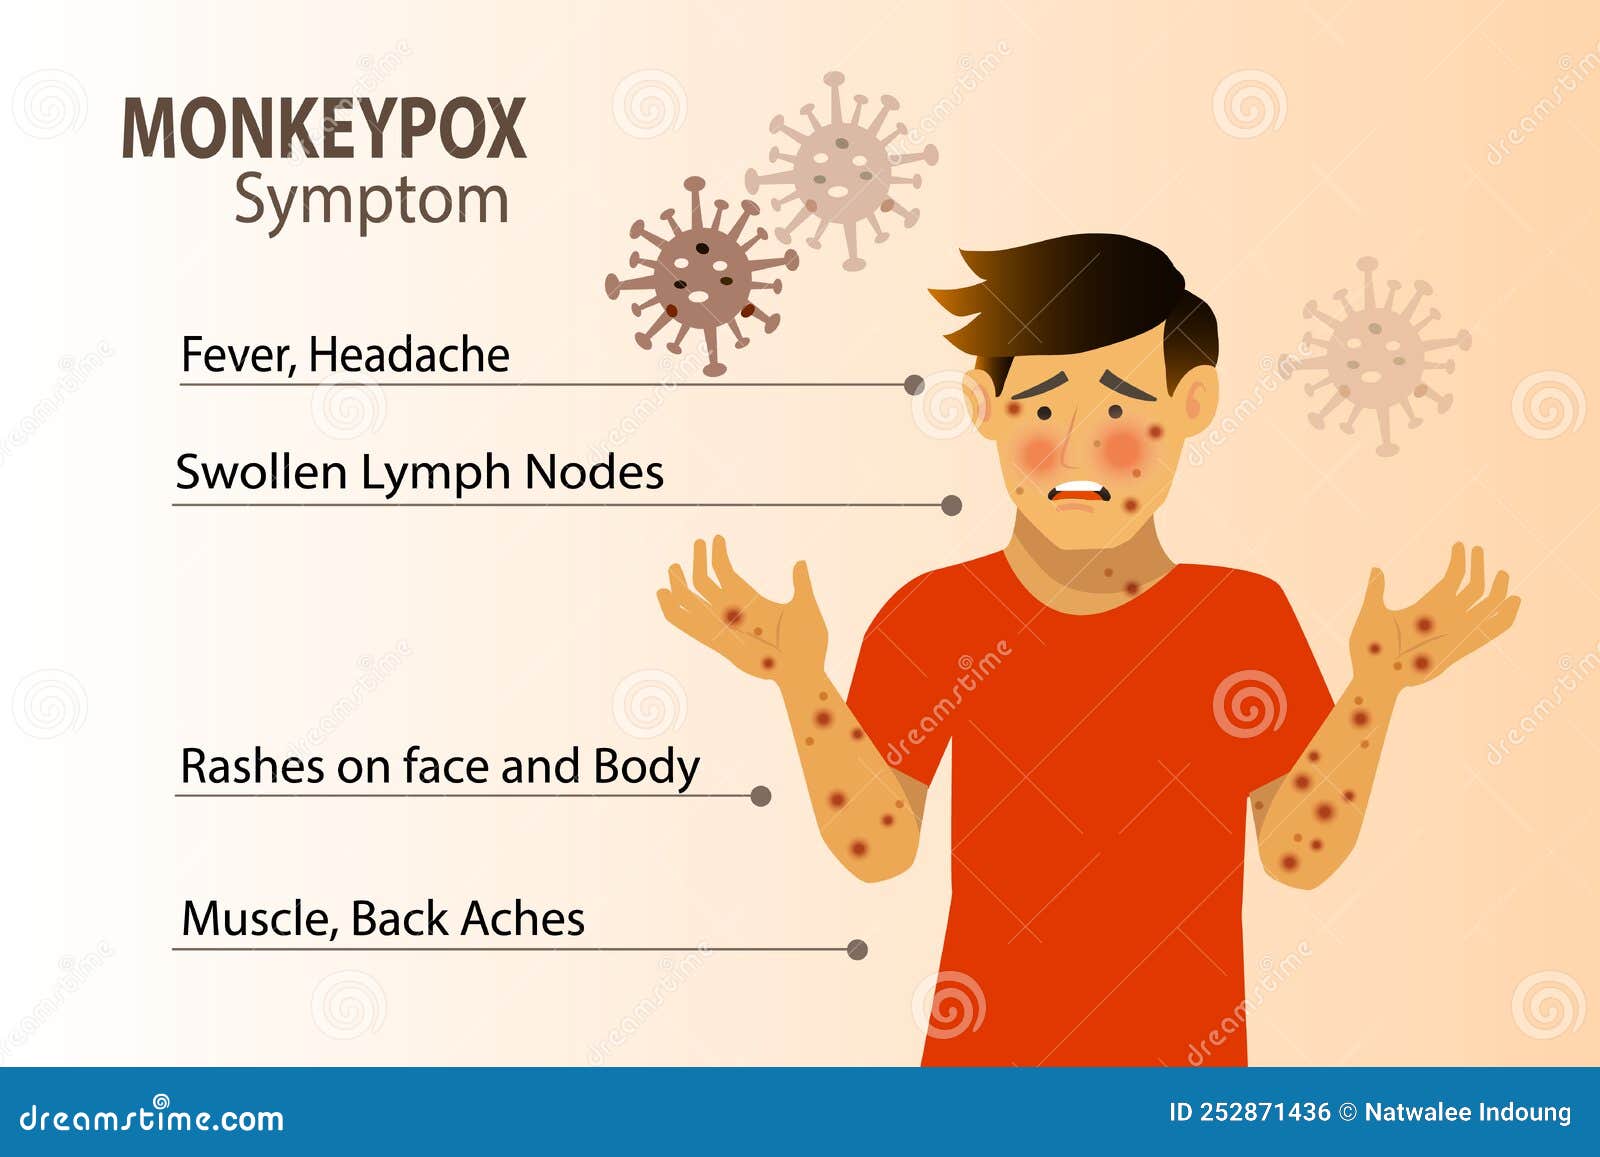 monkeypox virus symptom infographic on patient with fever, headache, swollen lymph node, rashes on face, body and back, muscle